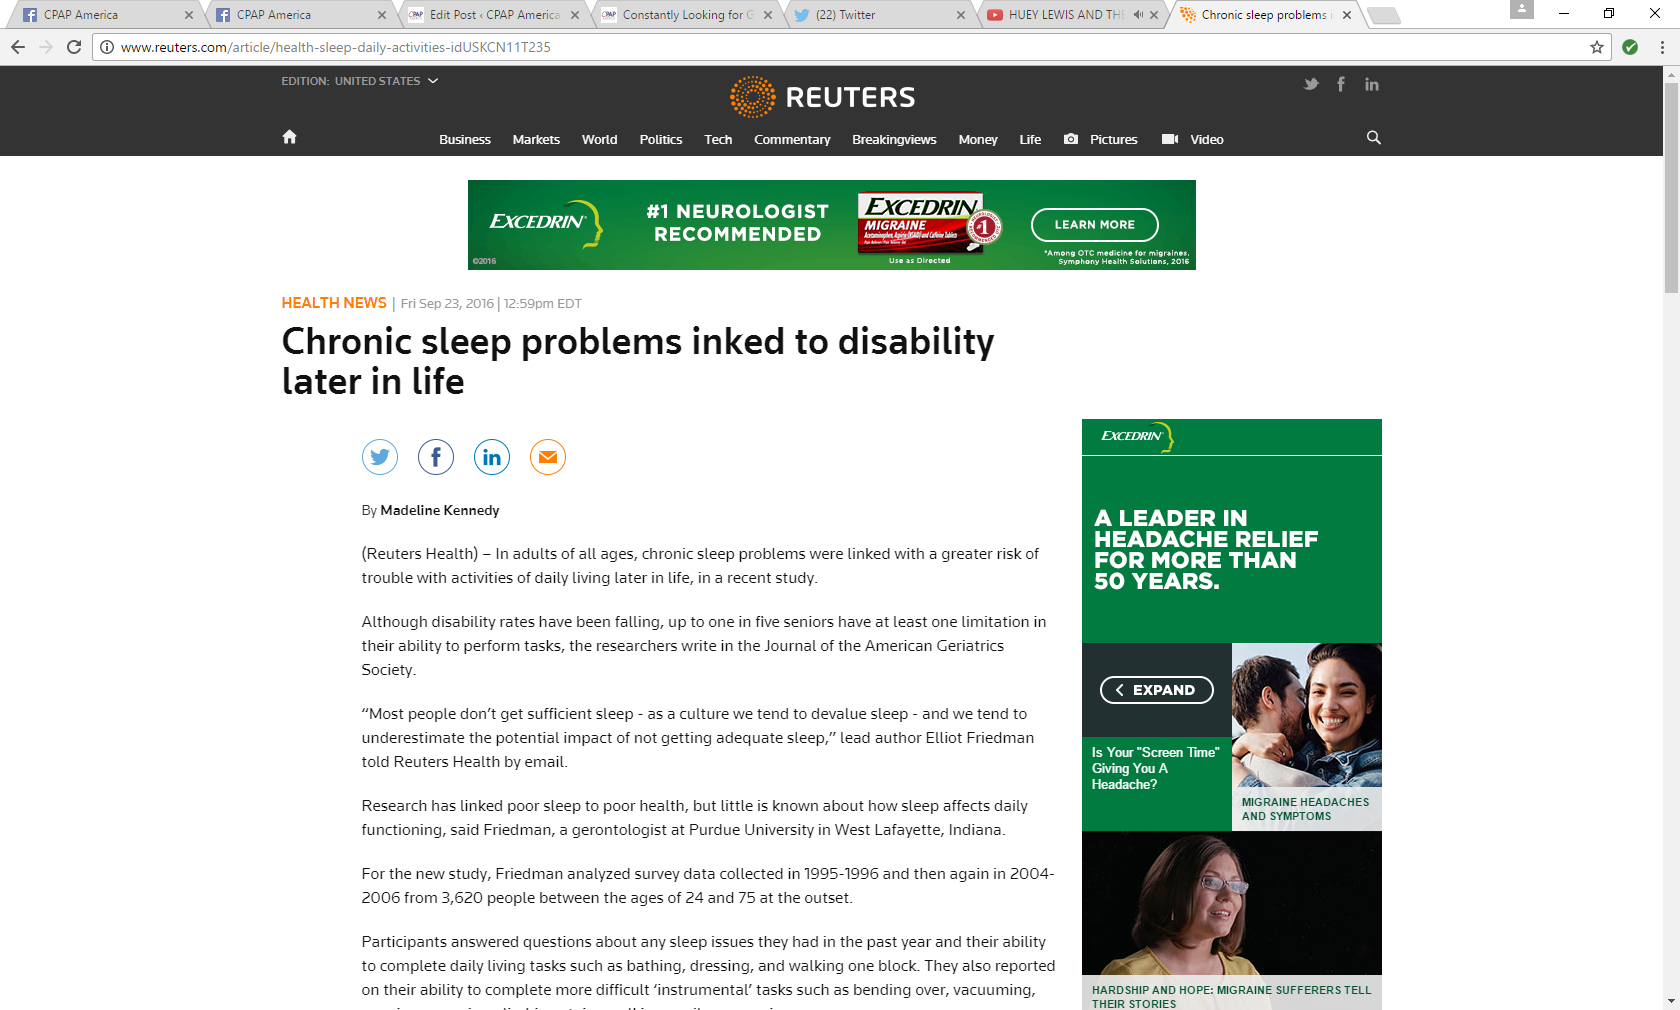 Could Chronic Sleep Problems Lead To Disability?